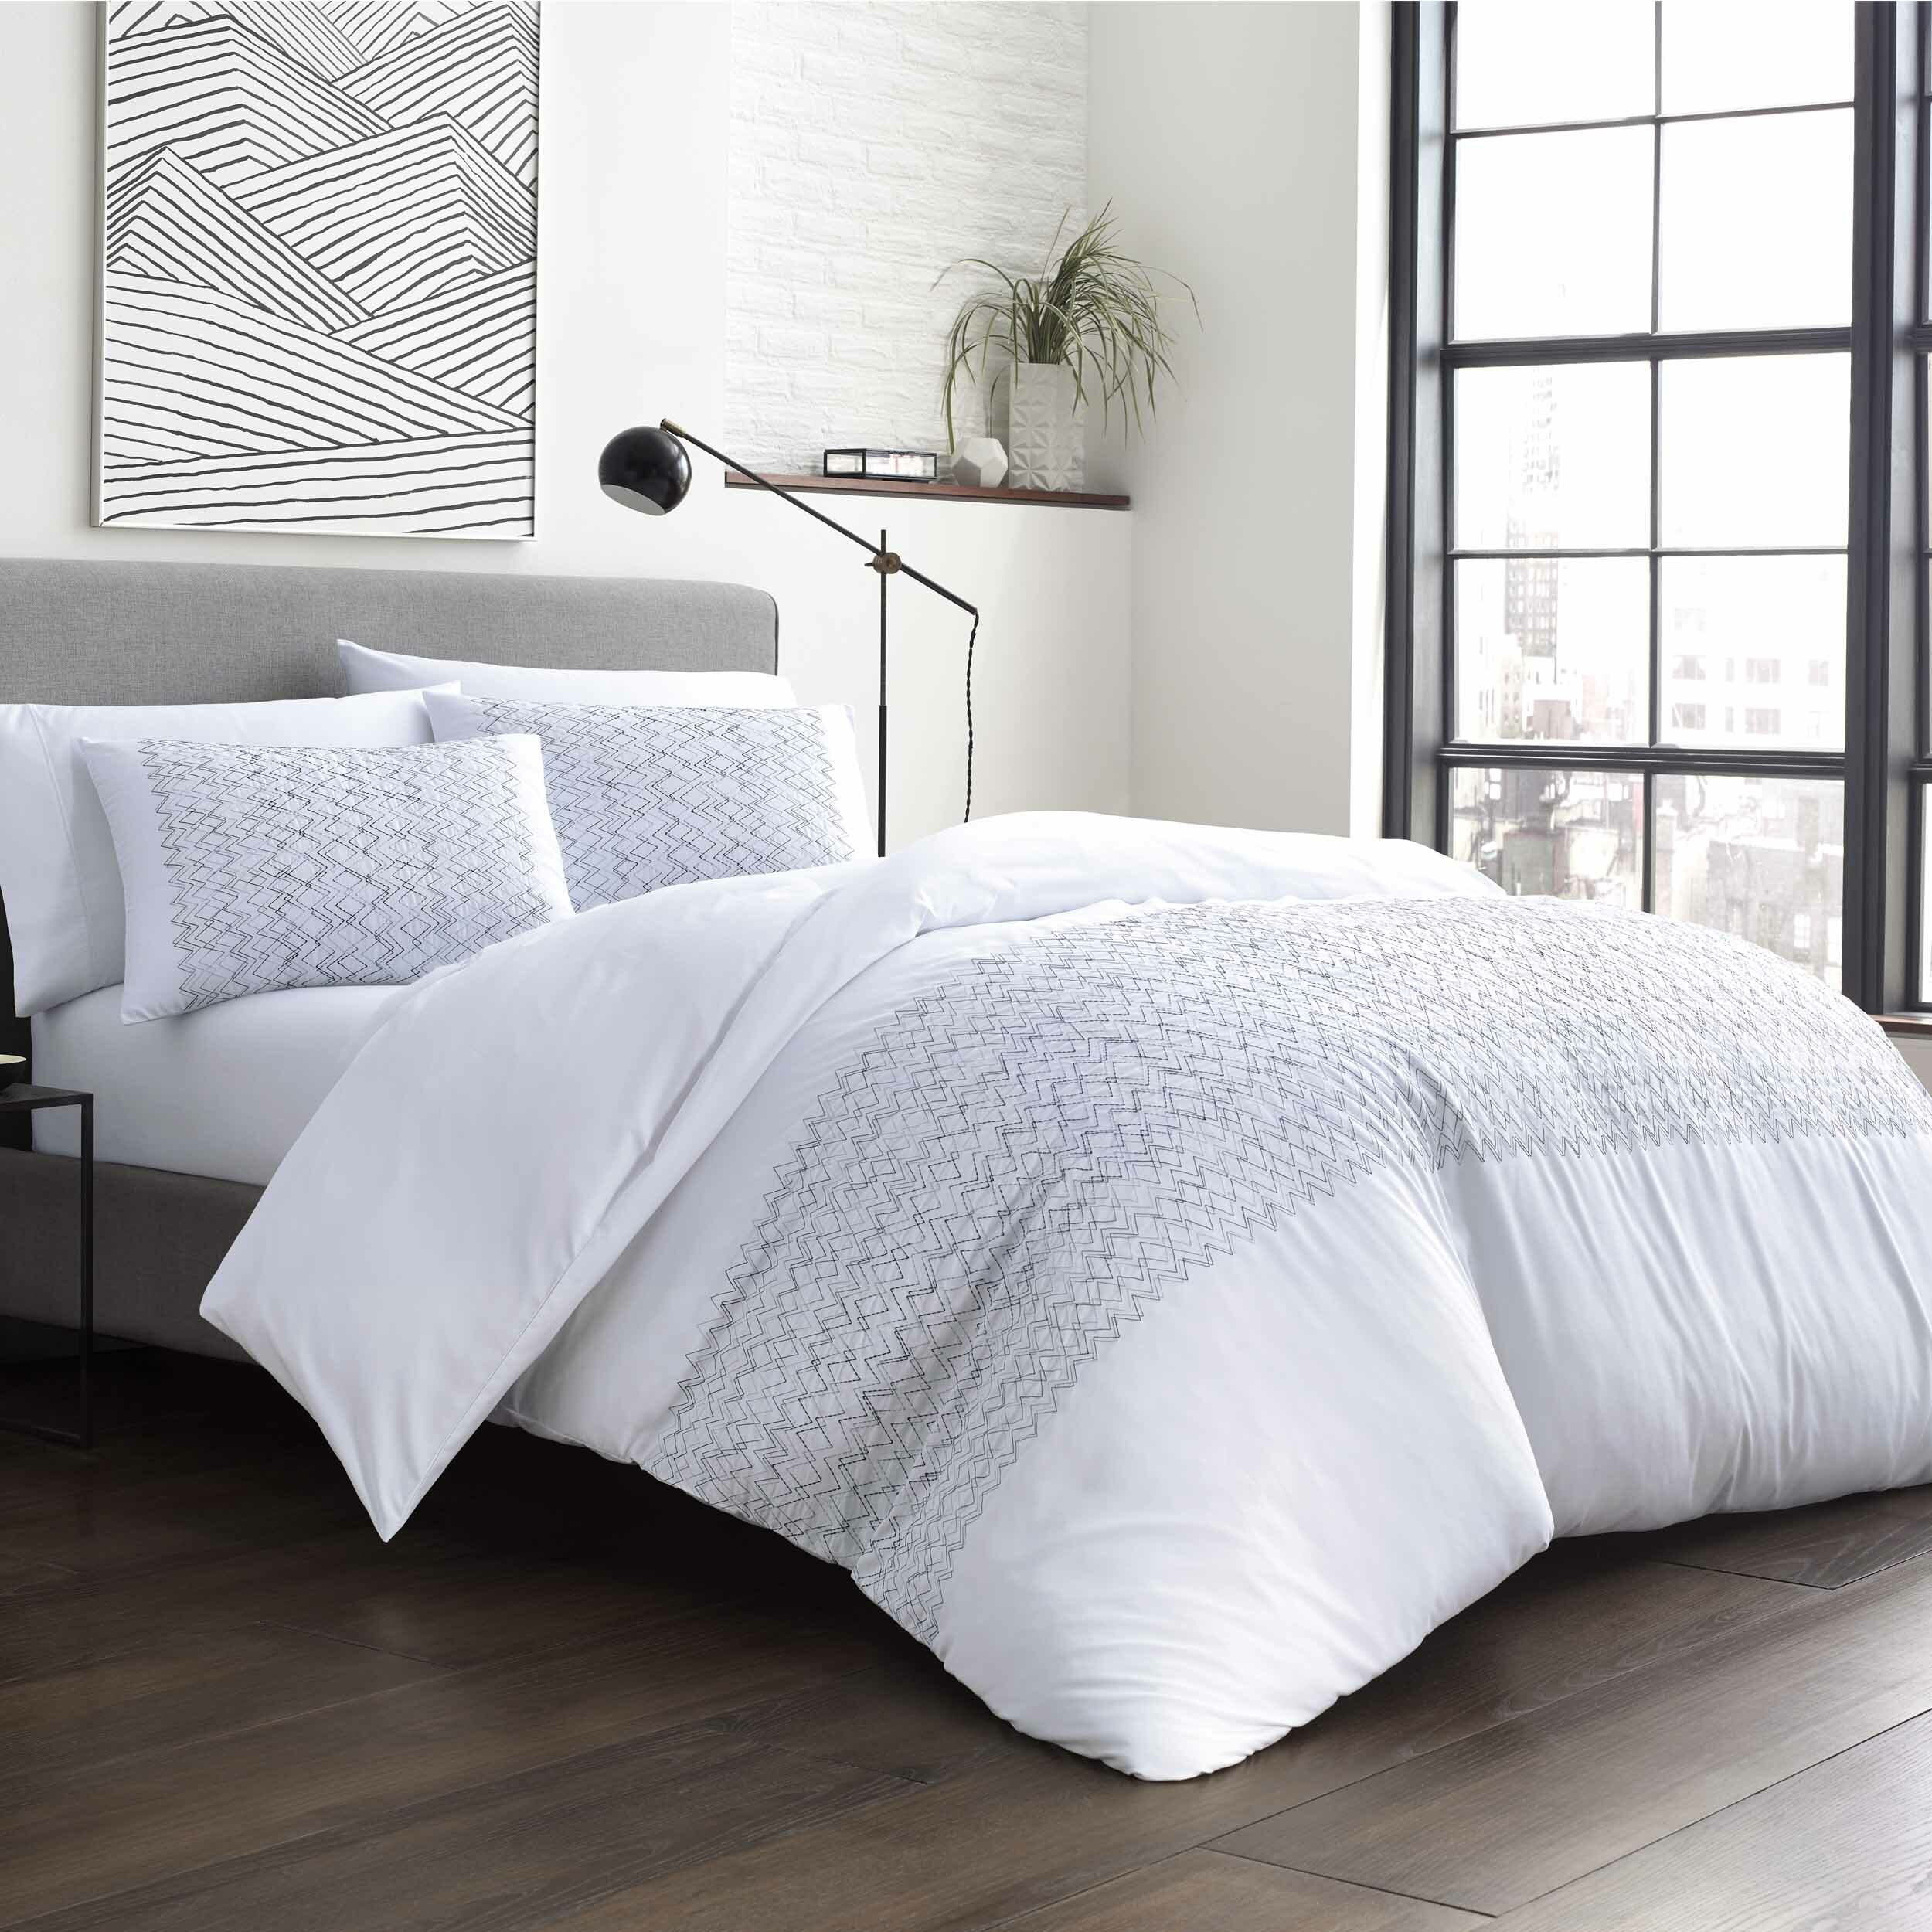 gray and white twin duvet cover